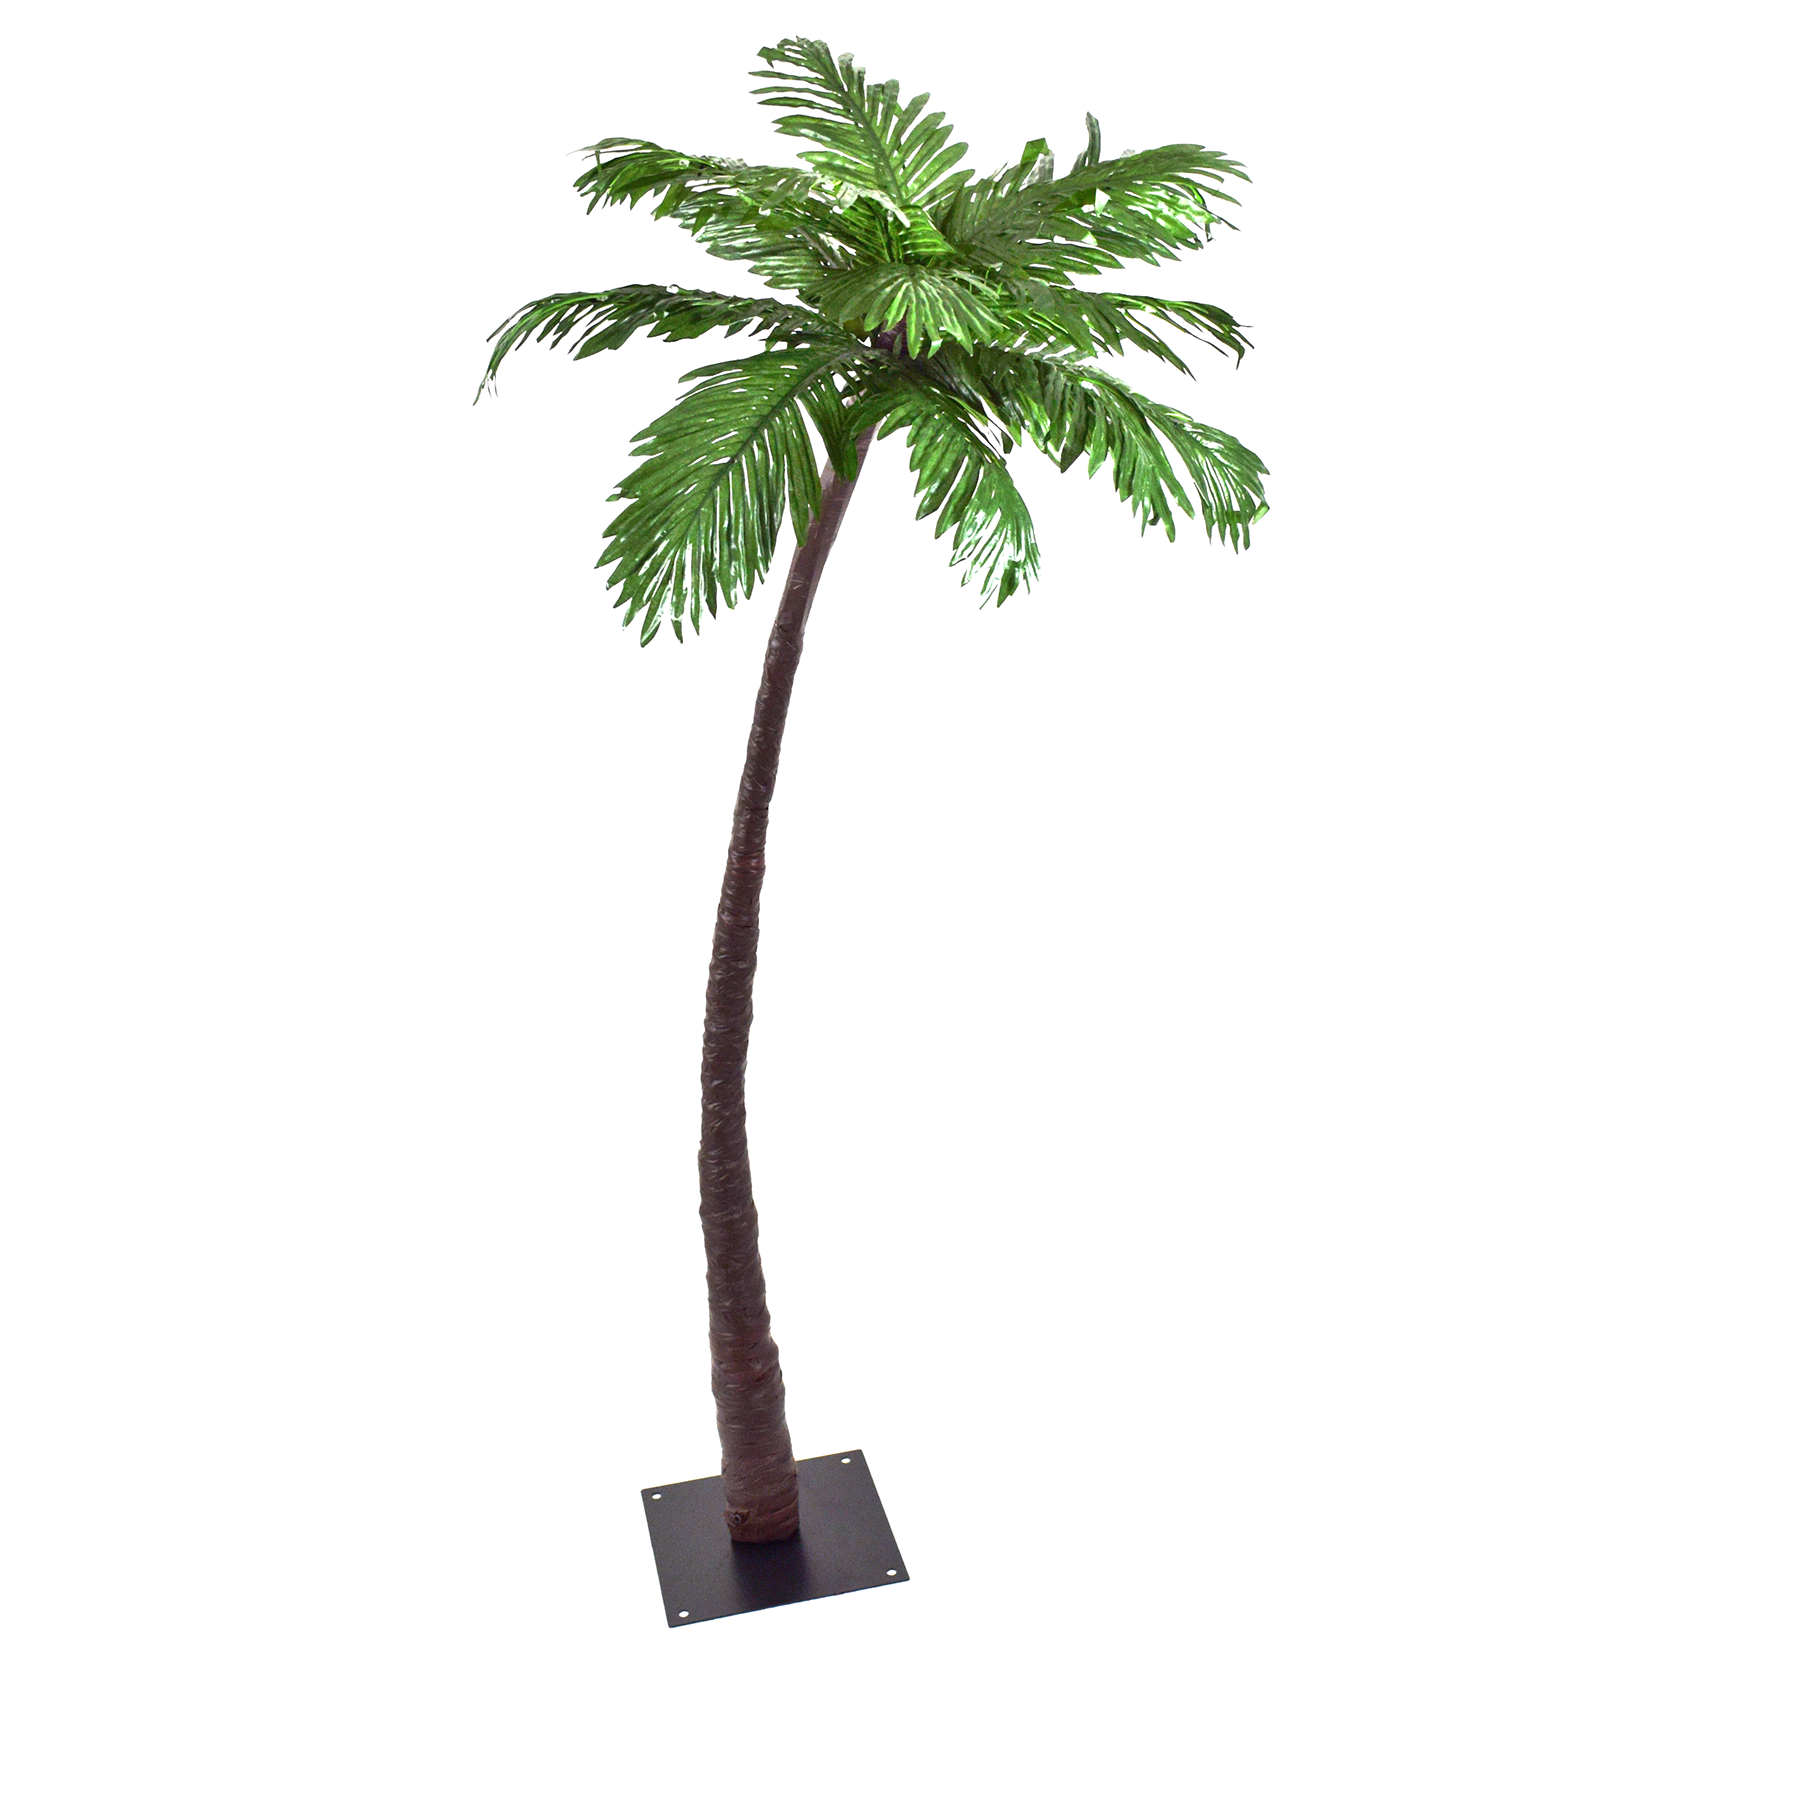 LED Lighted Palm Tree - Artificial - 7-feet